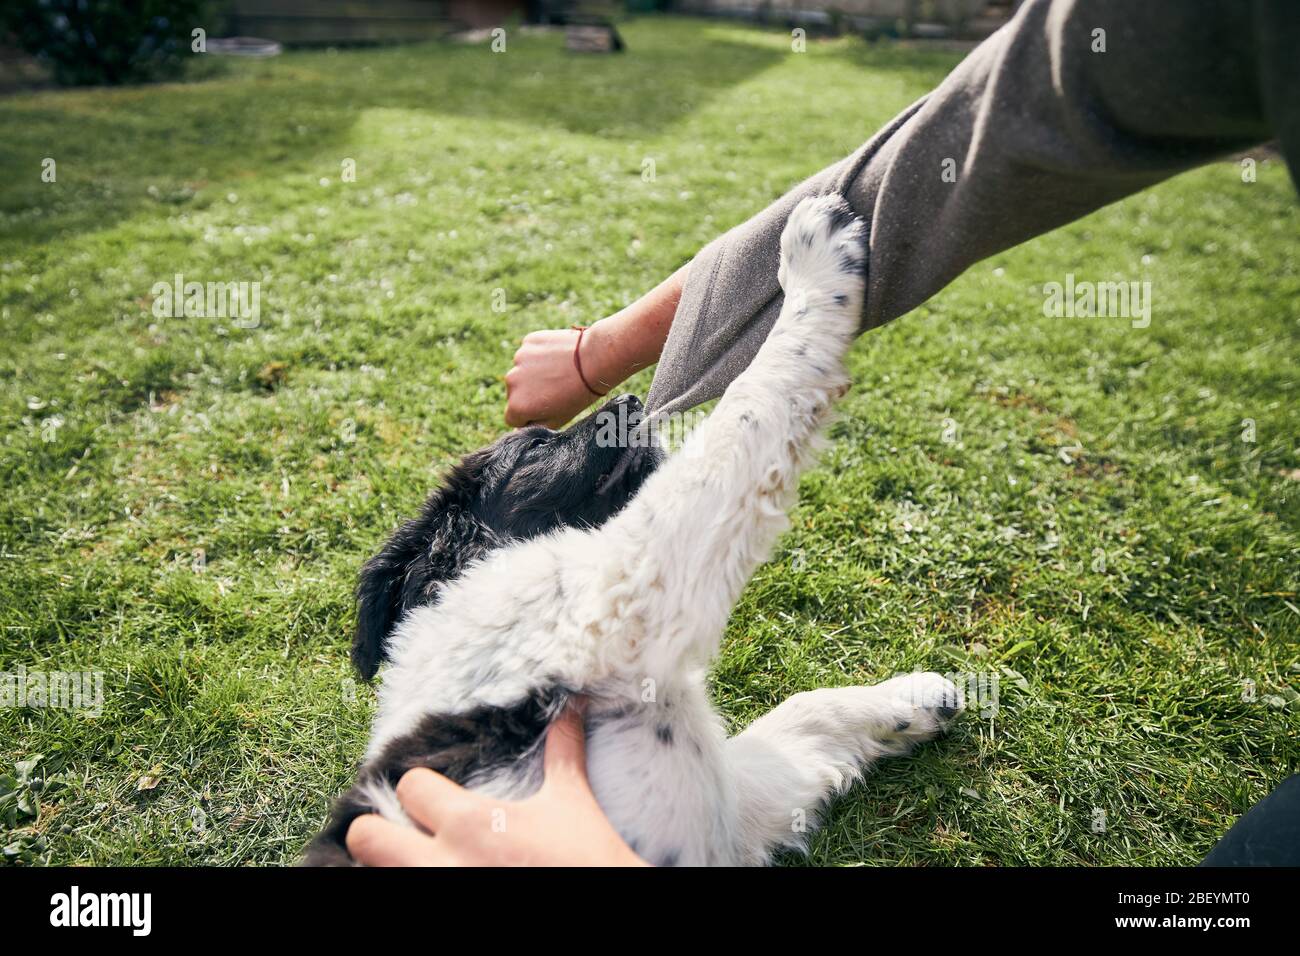 Domestic life with dog. Puppy of Czech mountain dog is playing with owner on back yard of house. Stock Photo